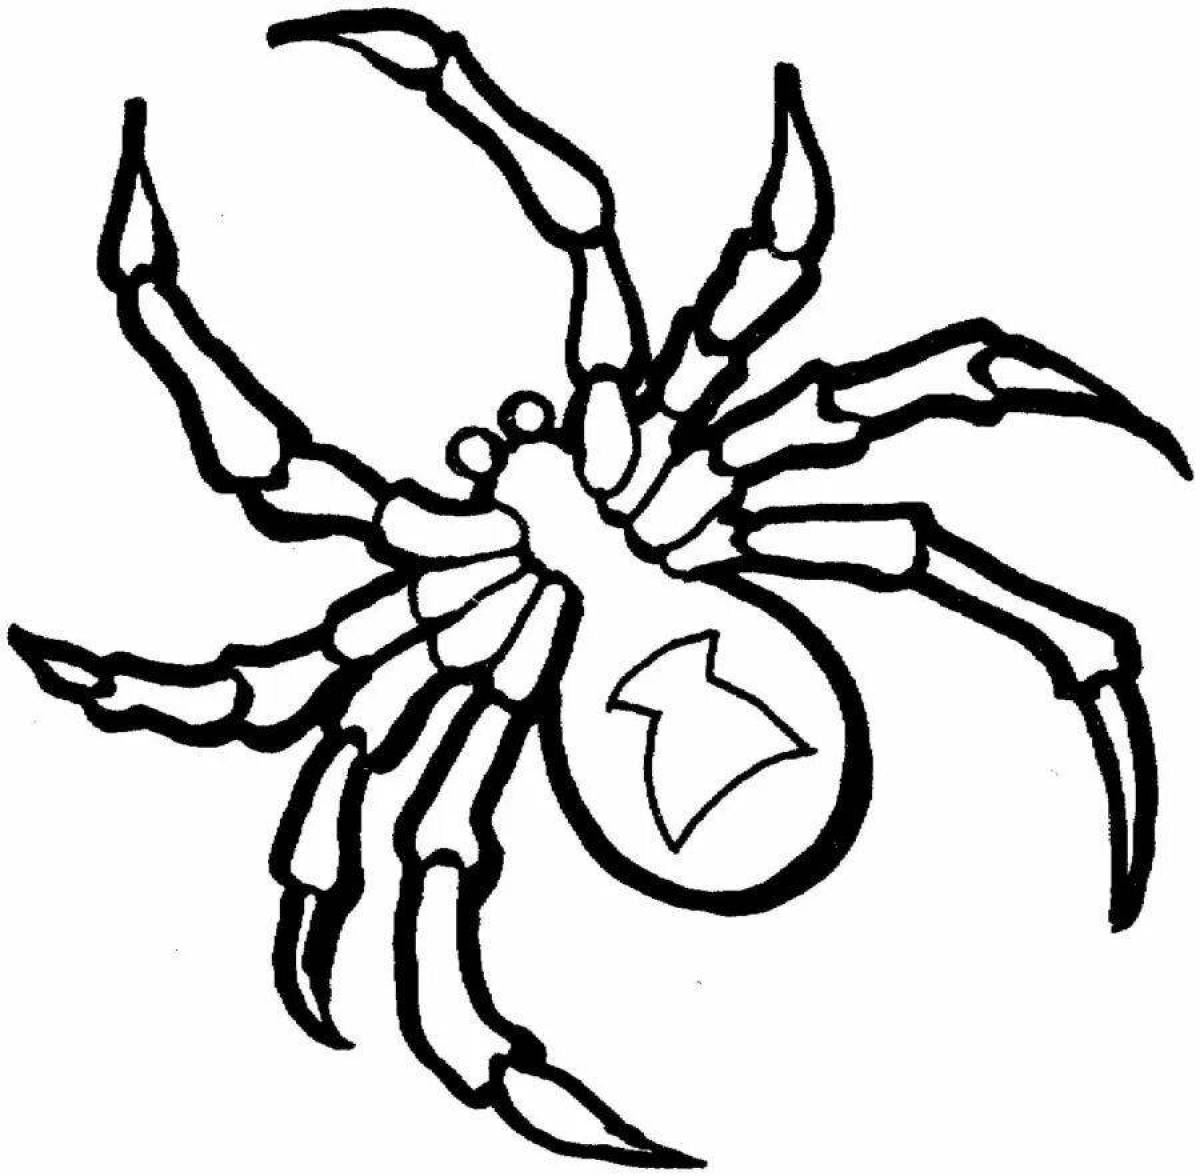 A sketch of a colorful spider